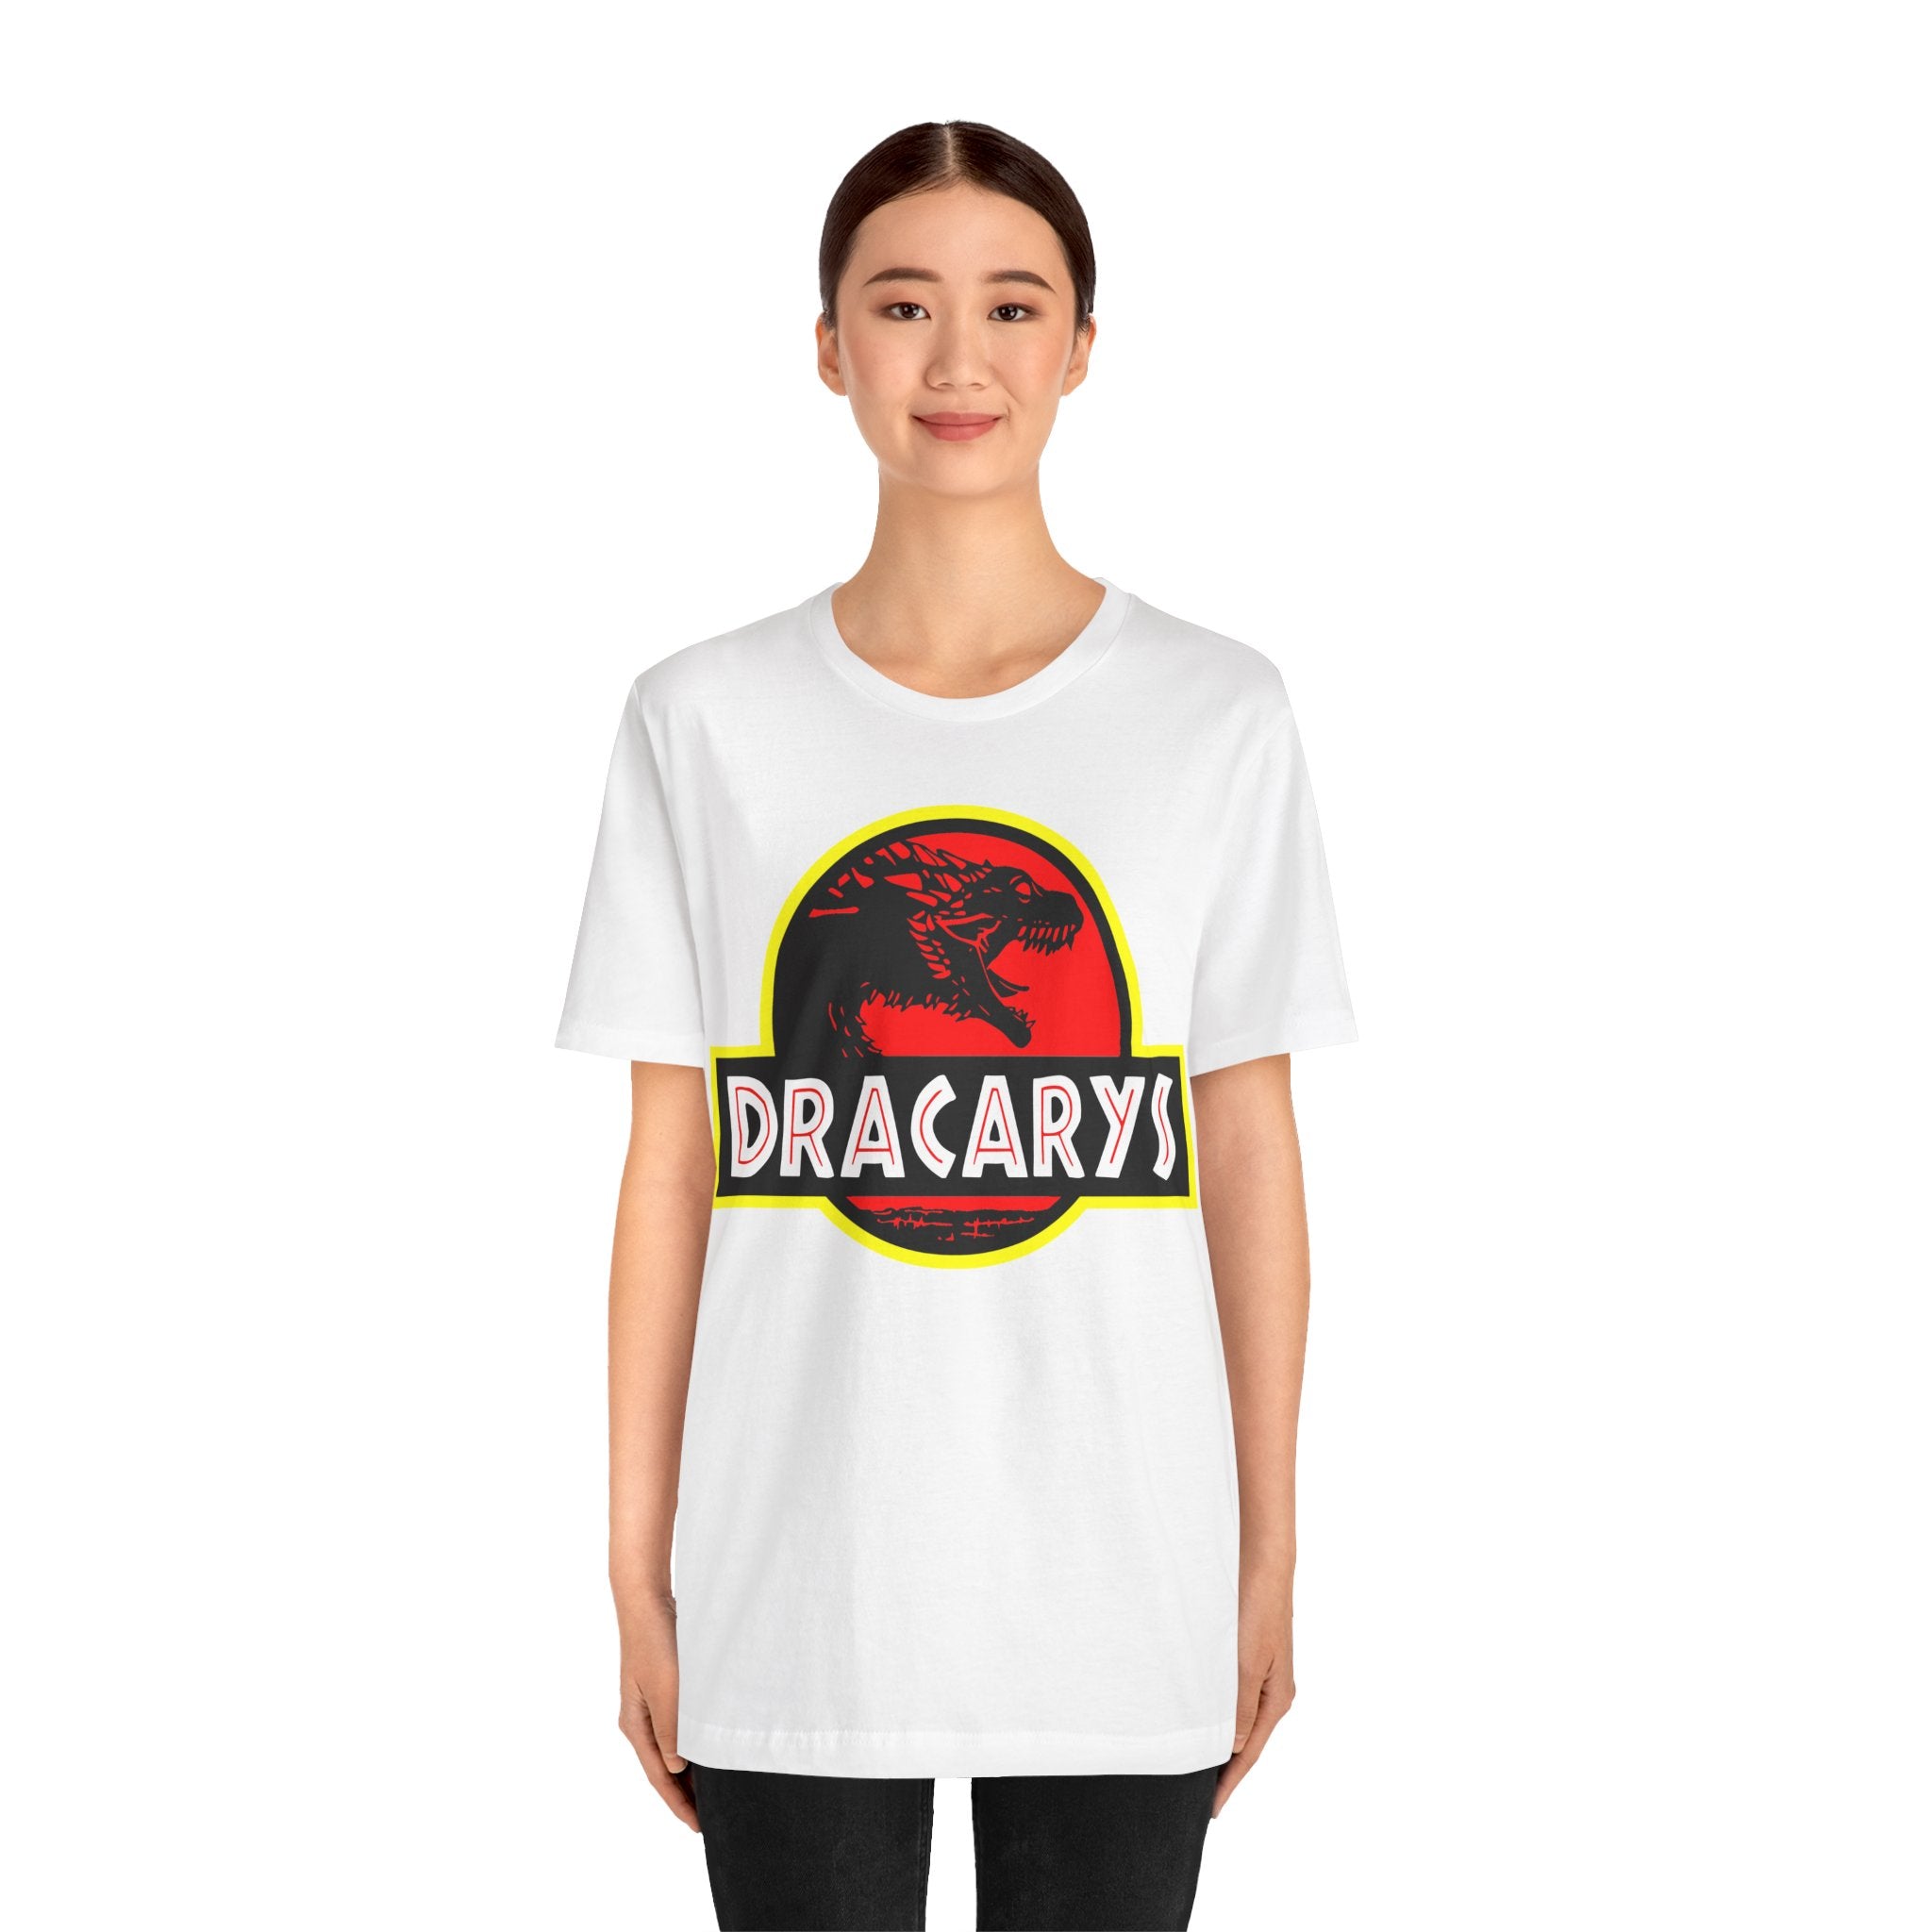 A young woman wearing a white Dracarys T-Shirt featuring a high-quality print of a dragon silhouette.